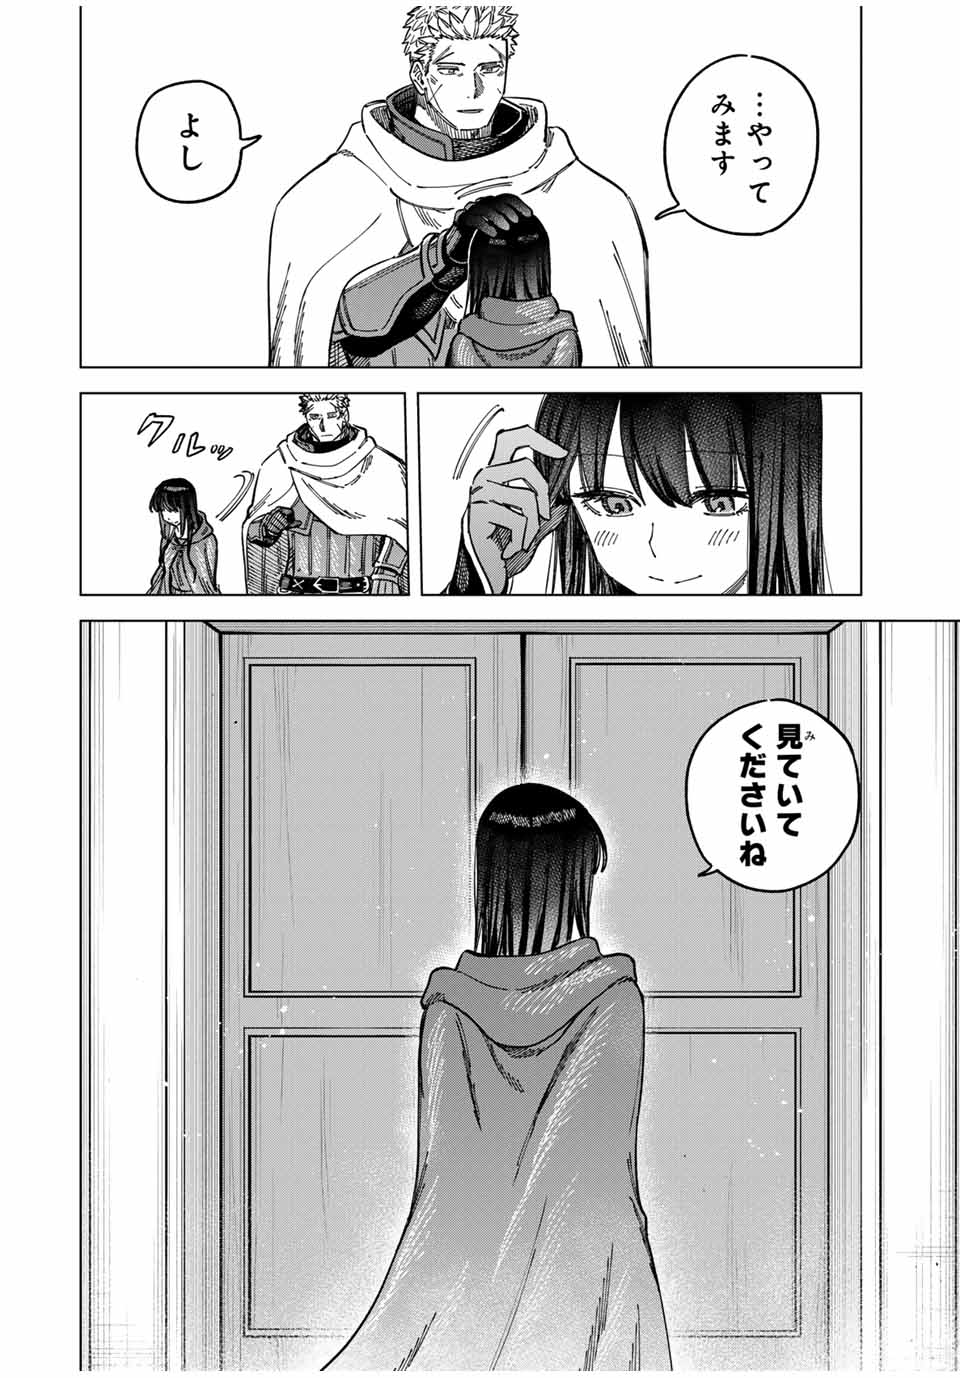 Witch and Mercenary 魔女と傭兵 第5.1話 - Page 6